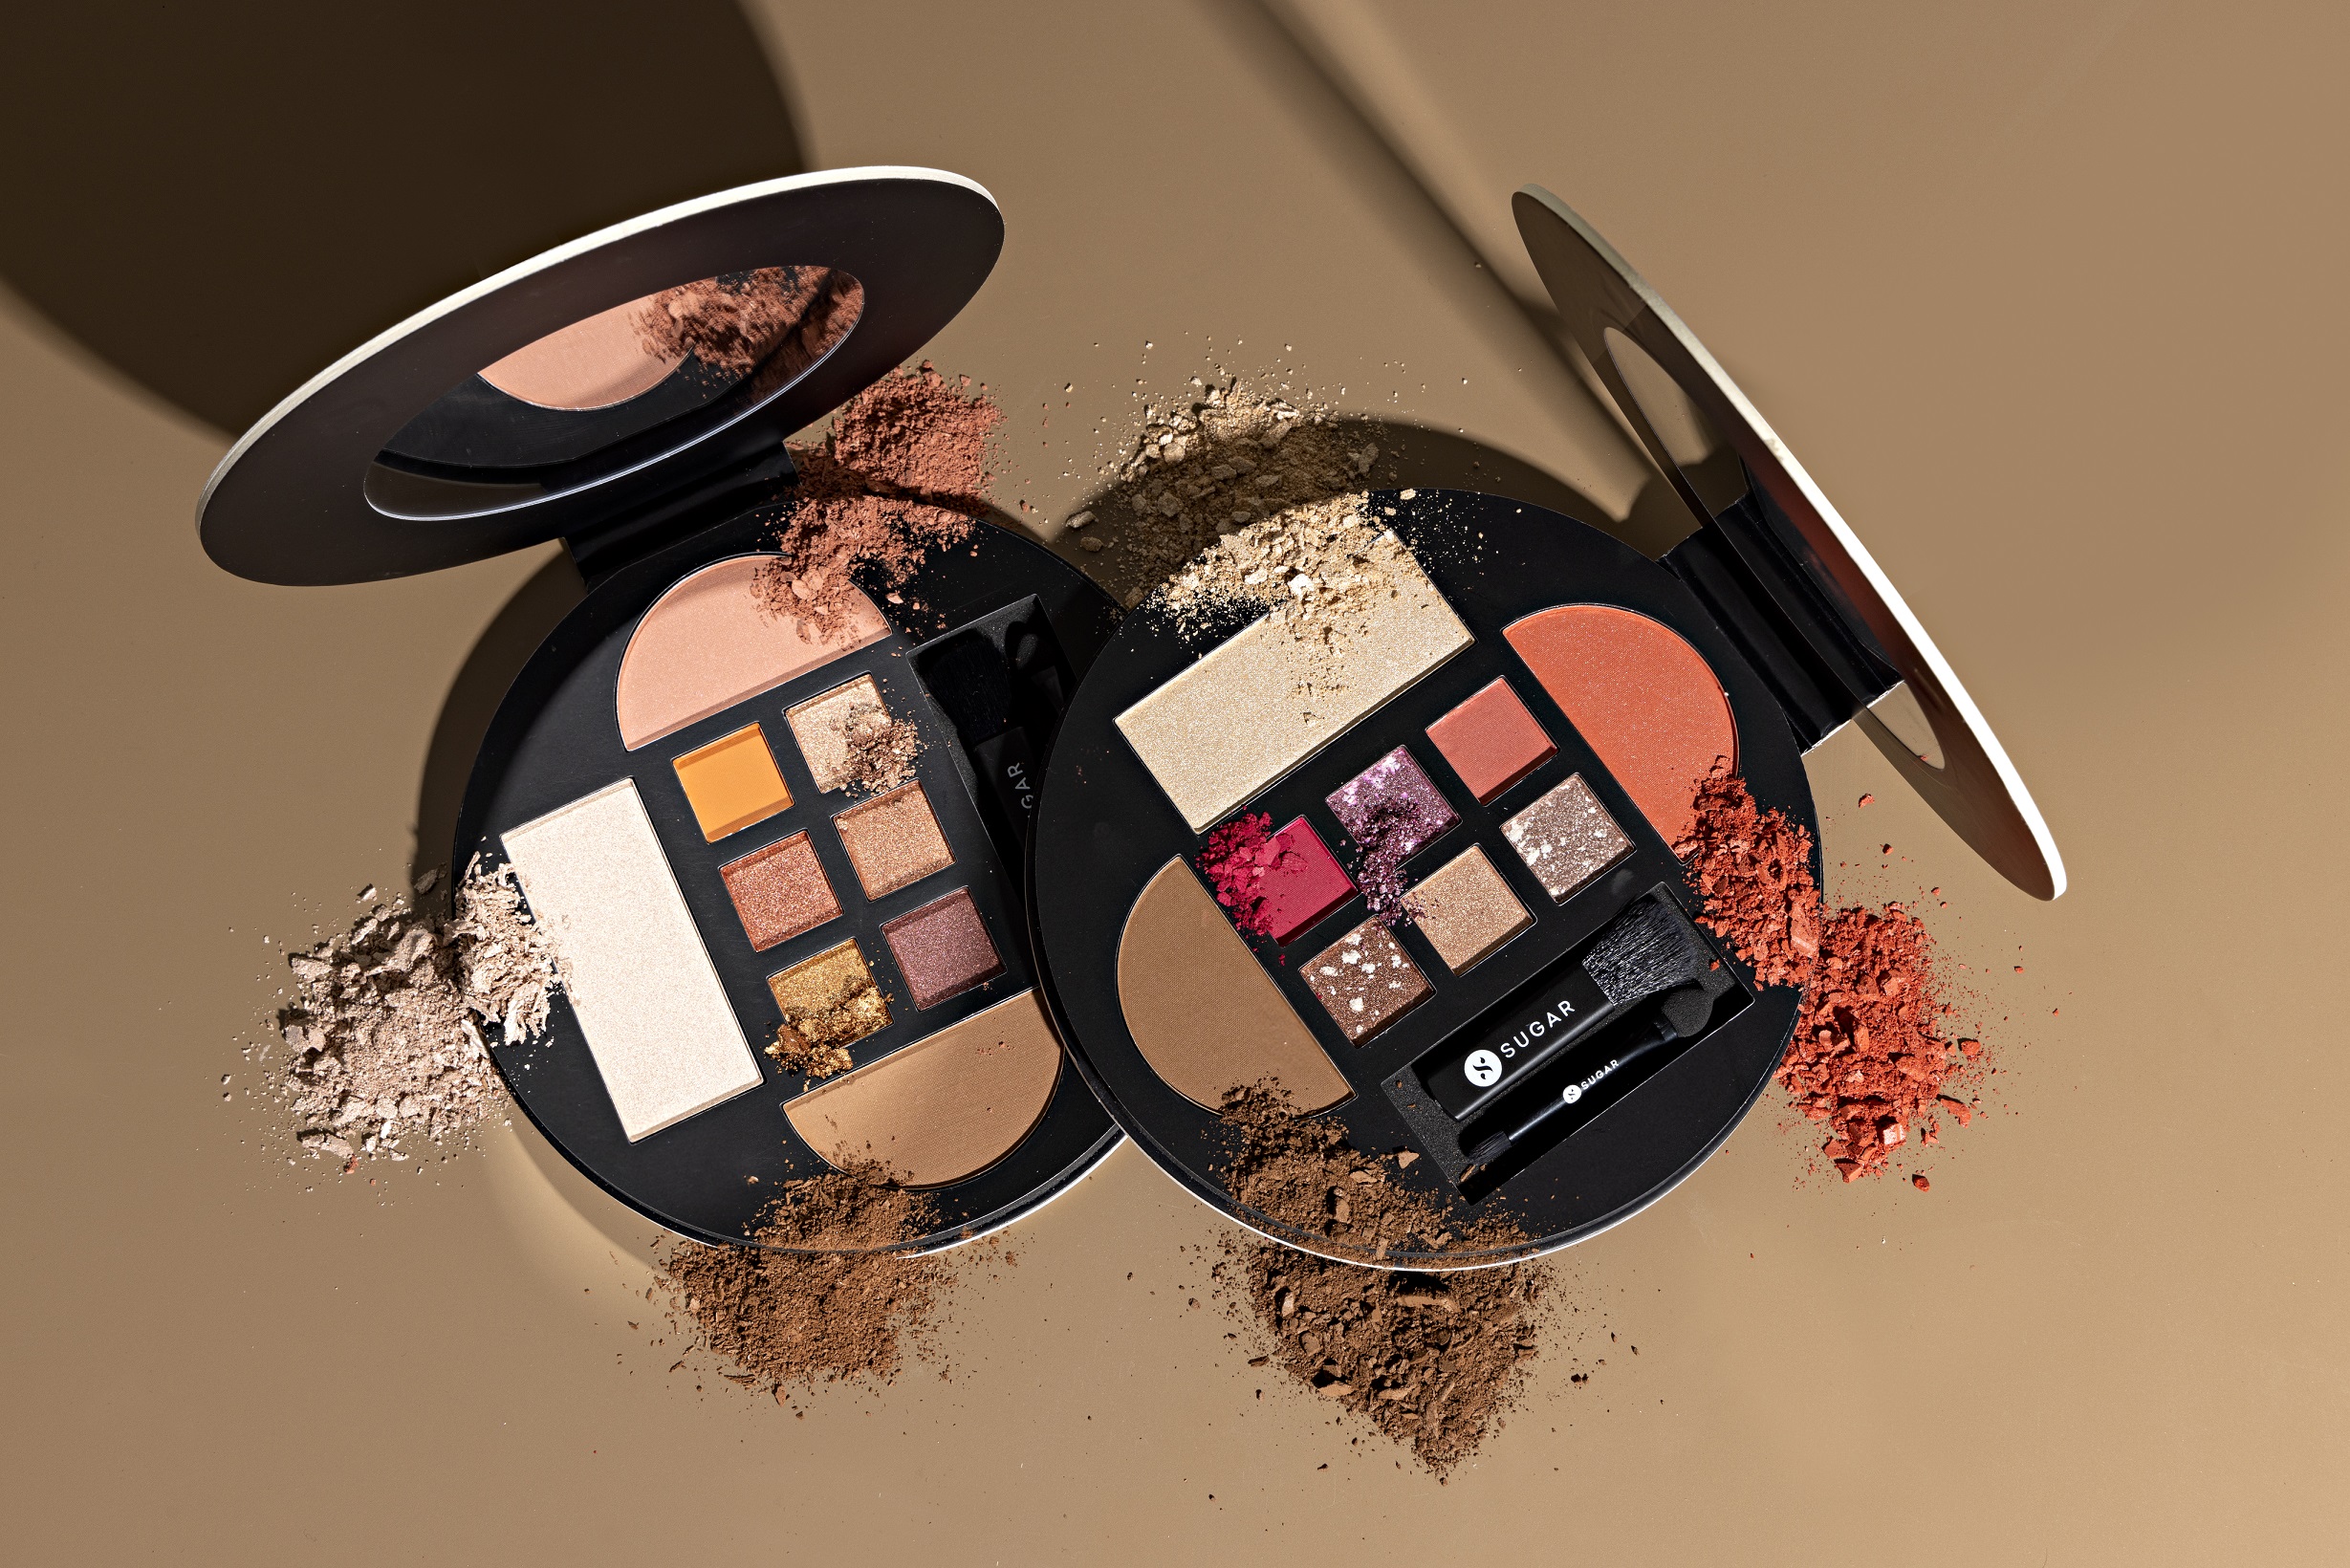 #OwnYourBeautyLook with SUGAR Cosmetics’ Contour De Force Eyes and Face Palette